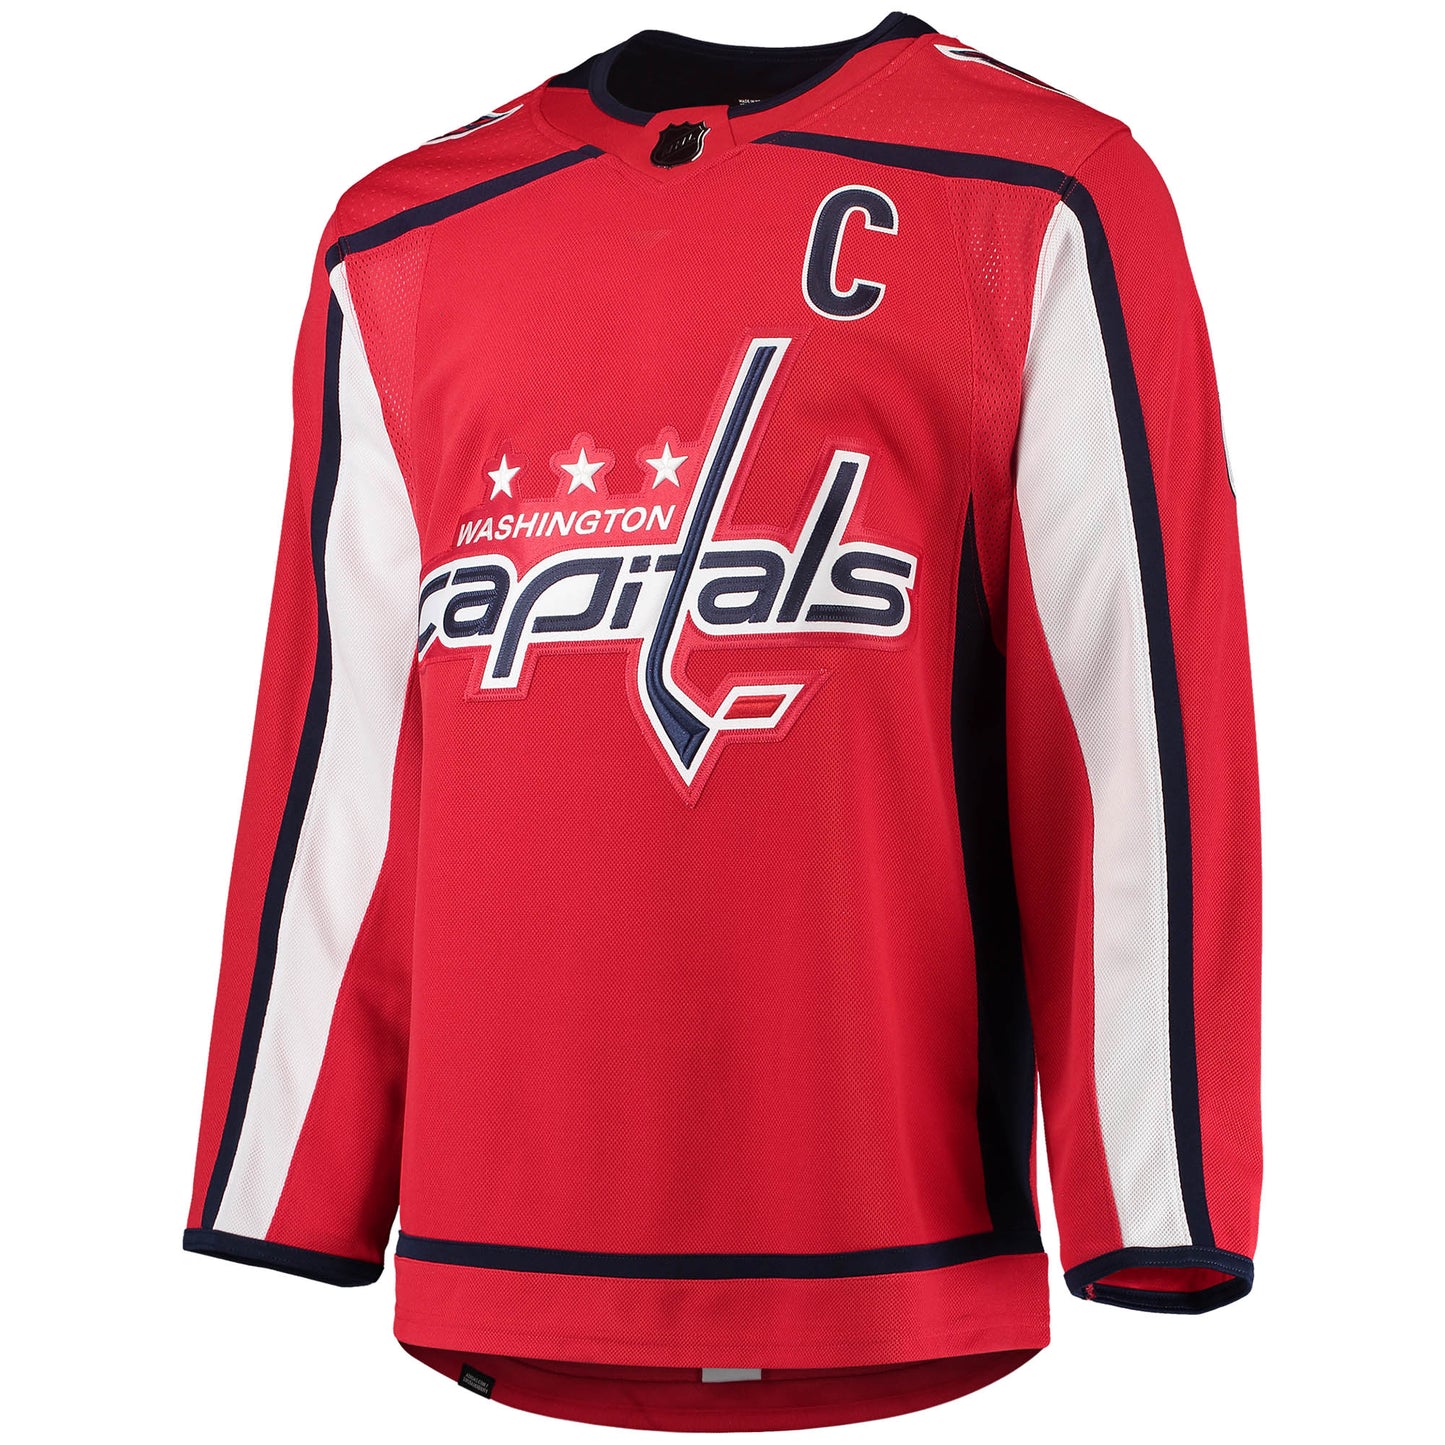 Alexander Ovechkin Washington Capitals adidas Home Captain Patch Primegreen Authentic Pro Player Jersey - Red